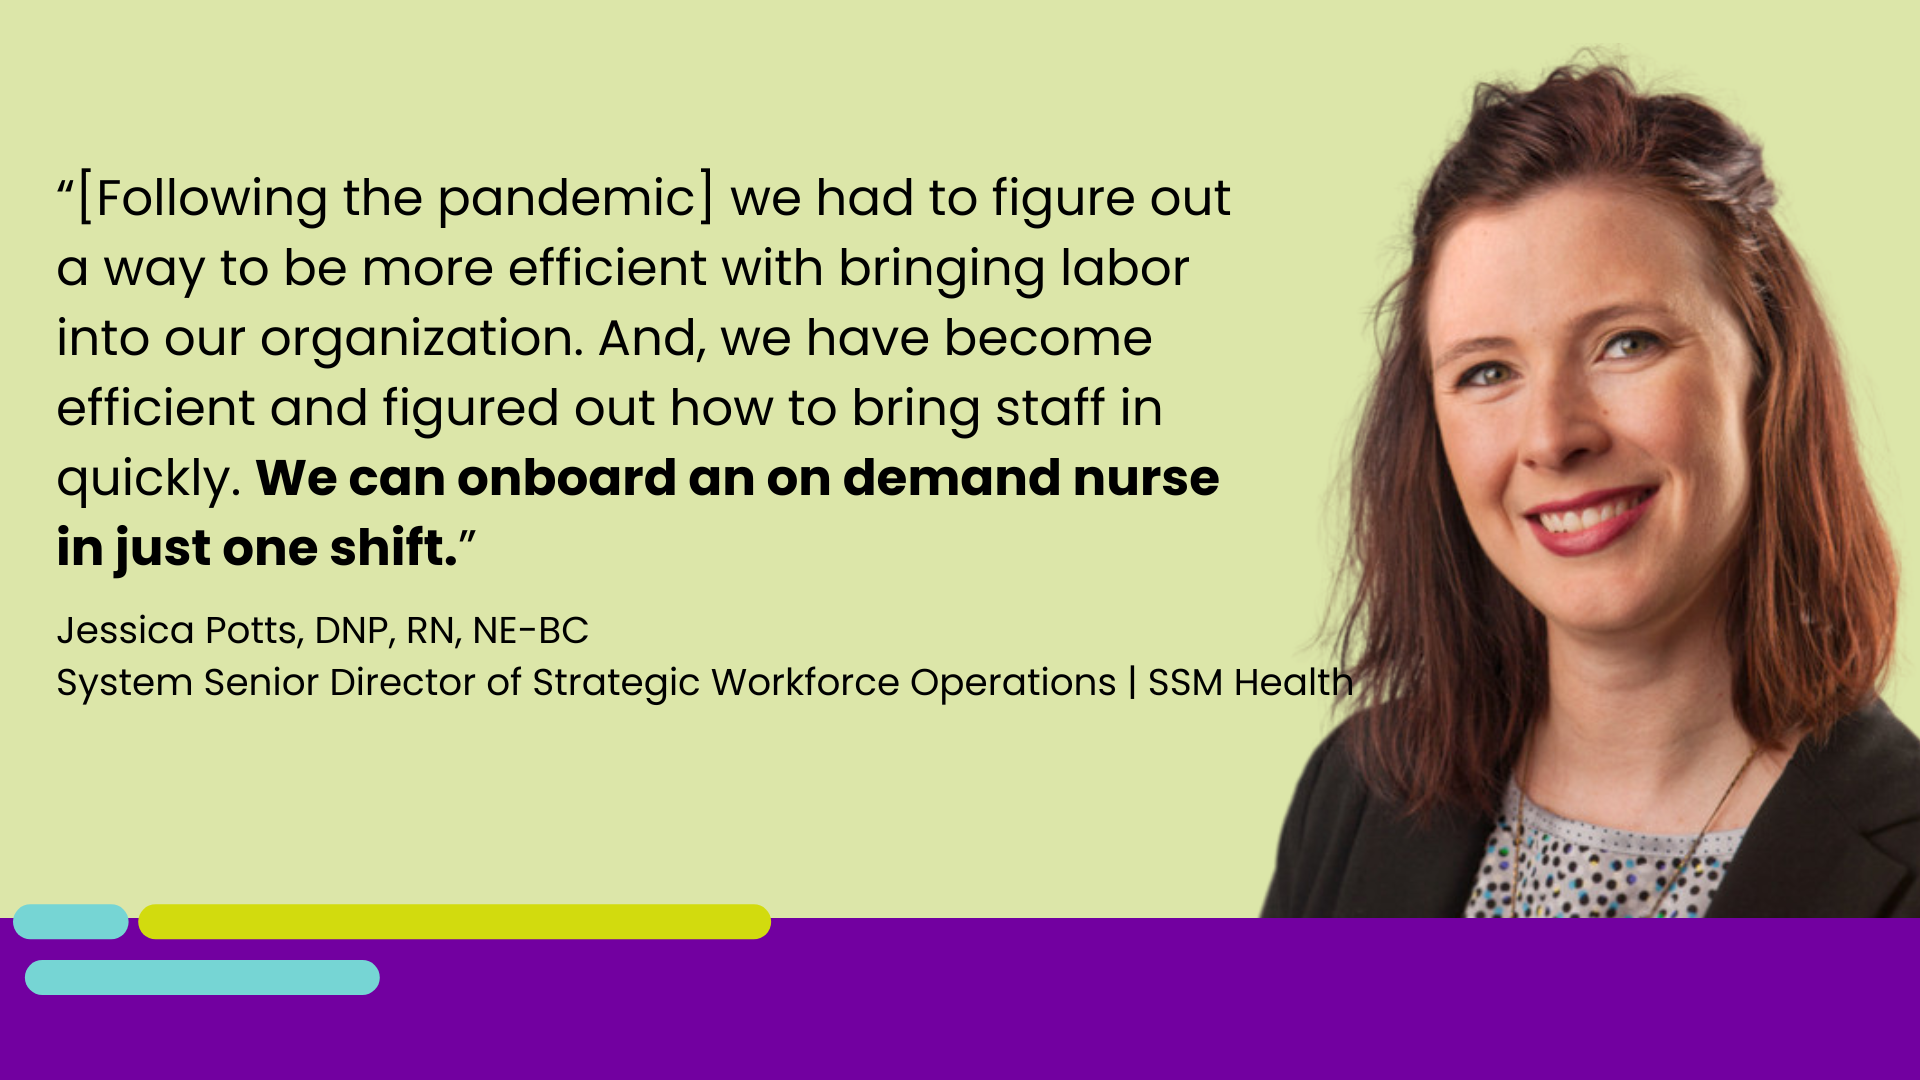 Implementing on demand flexible staffing model at SSM Health